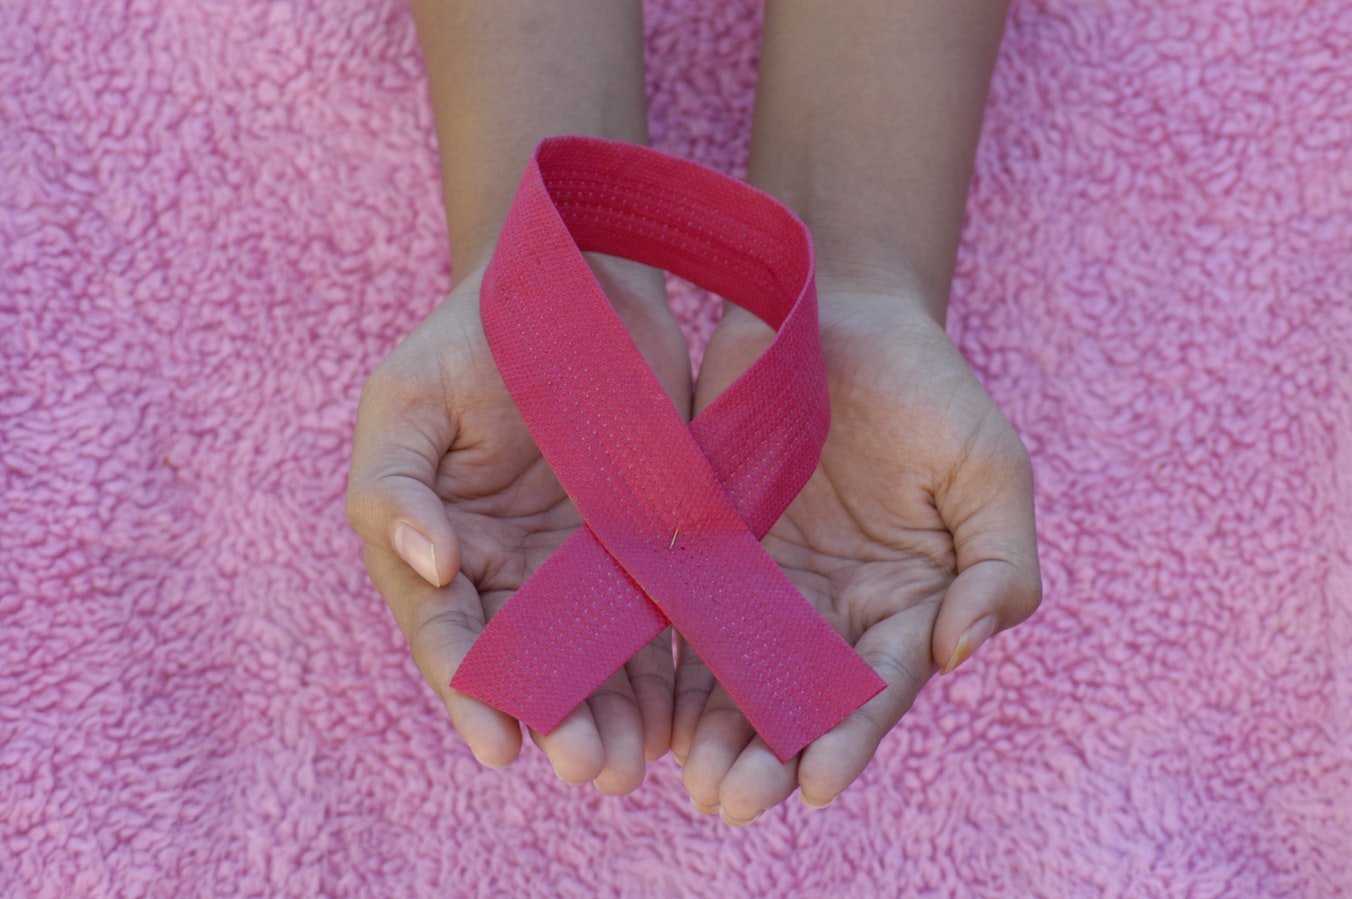 The pink ribbon of breast cancer awareness. | Source: Unsplash